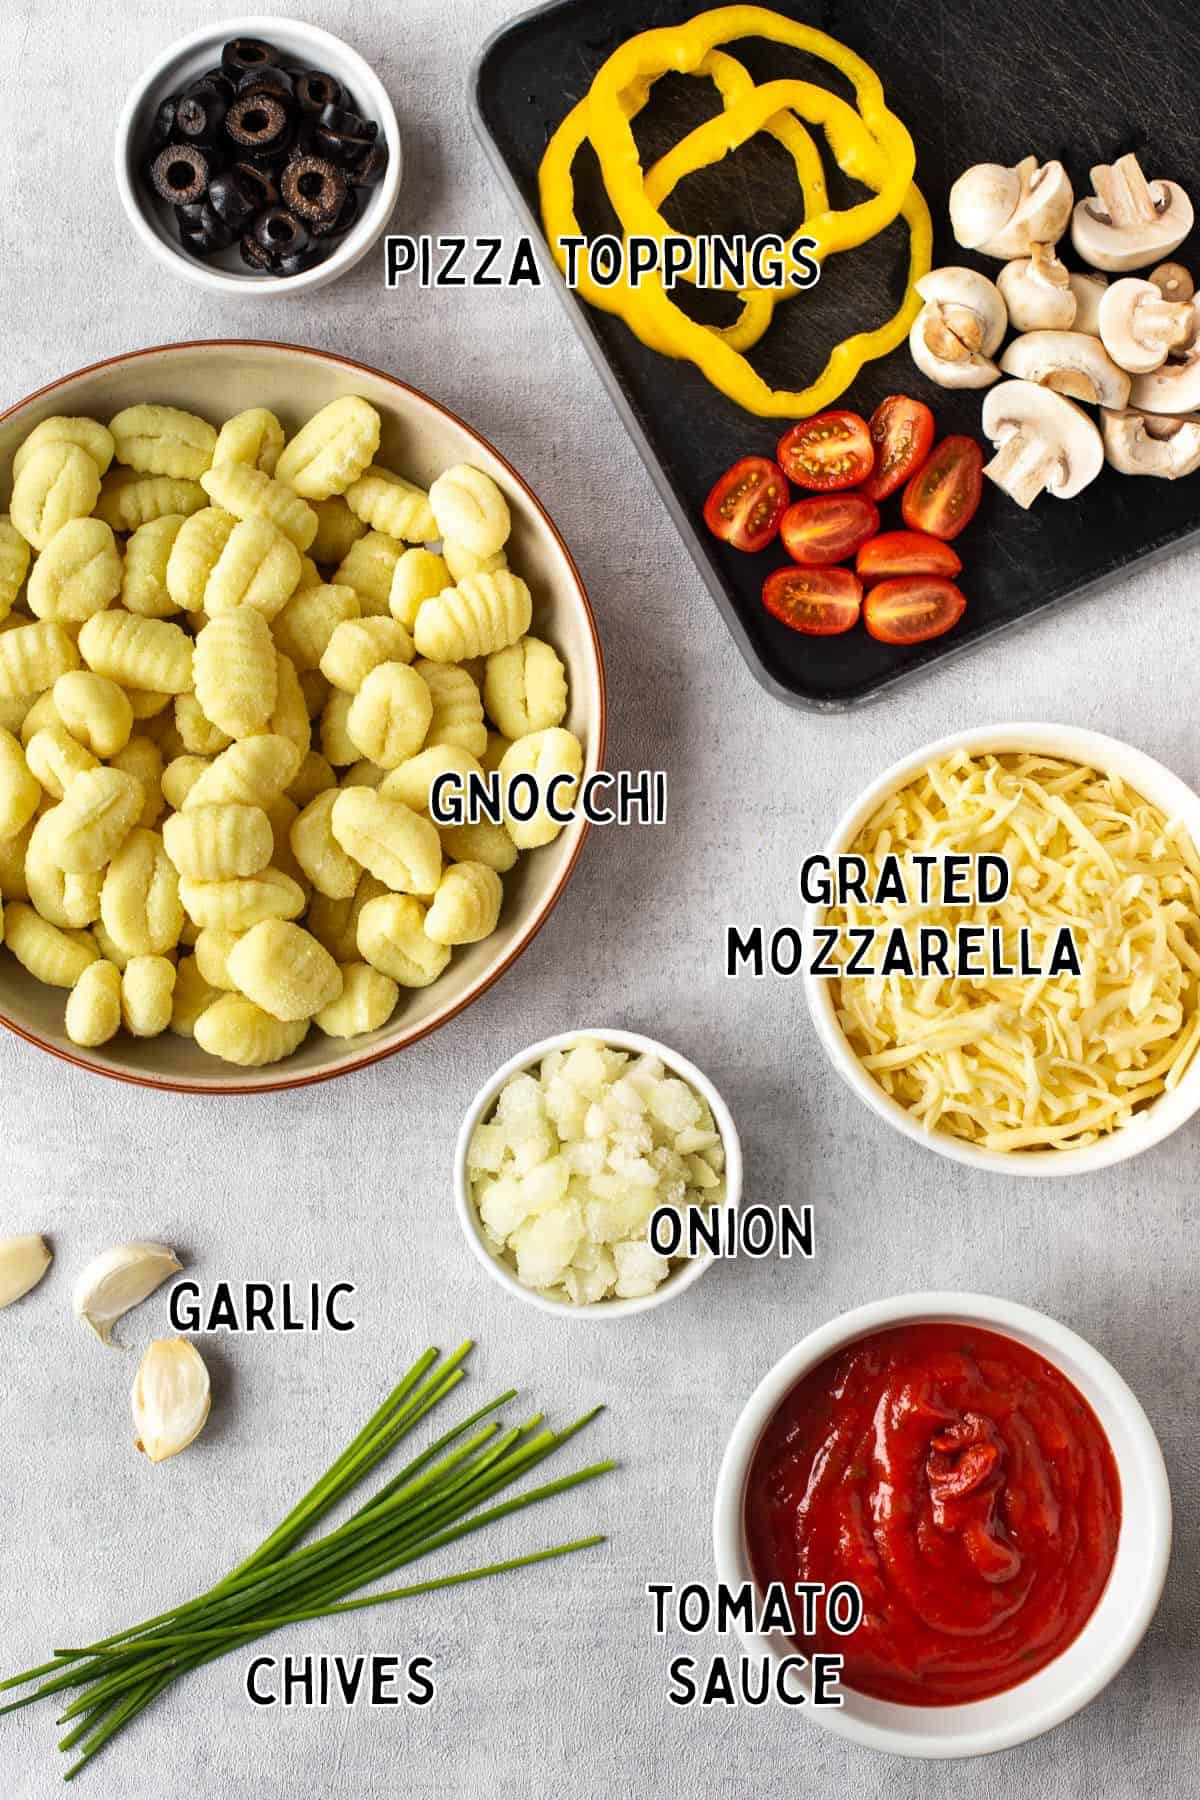 Ingredients for pizza baked gnocchi with text overlay.